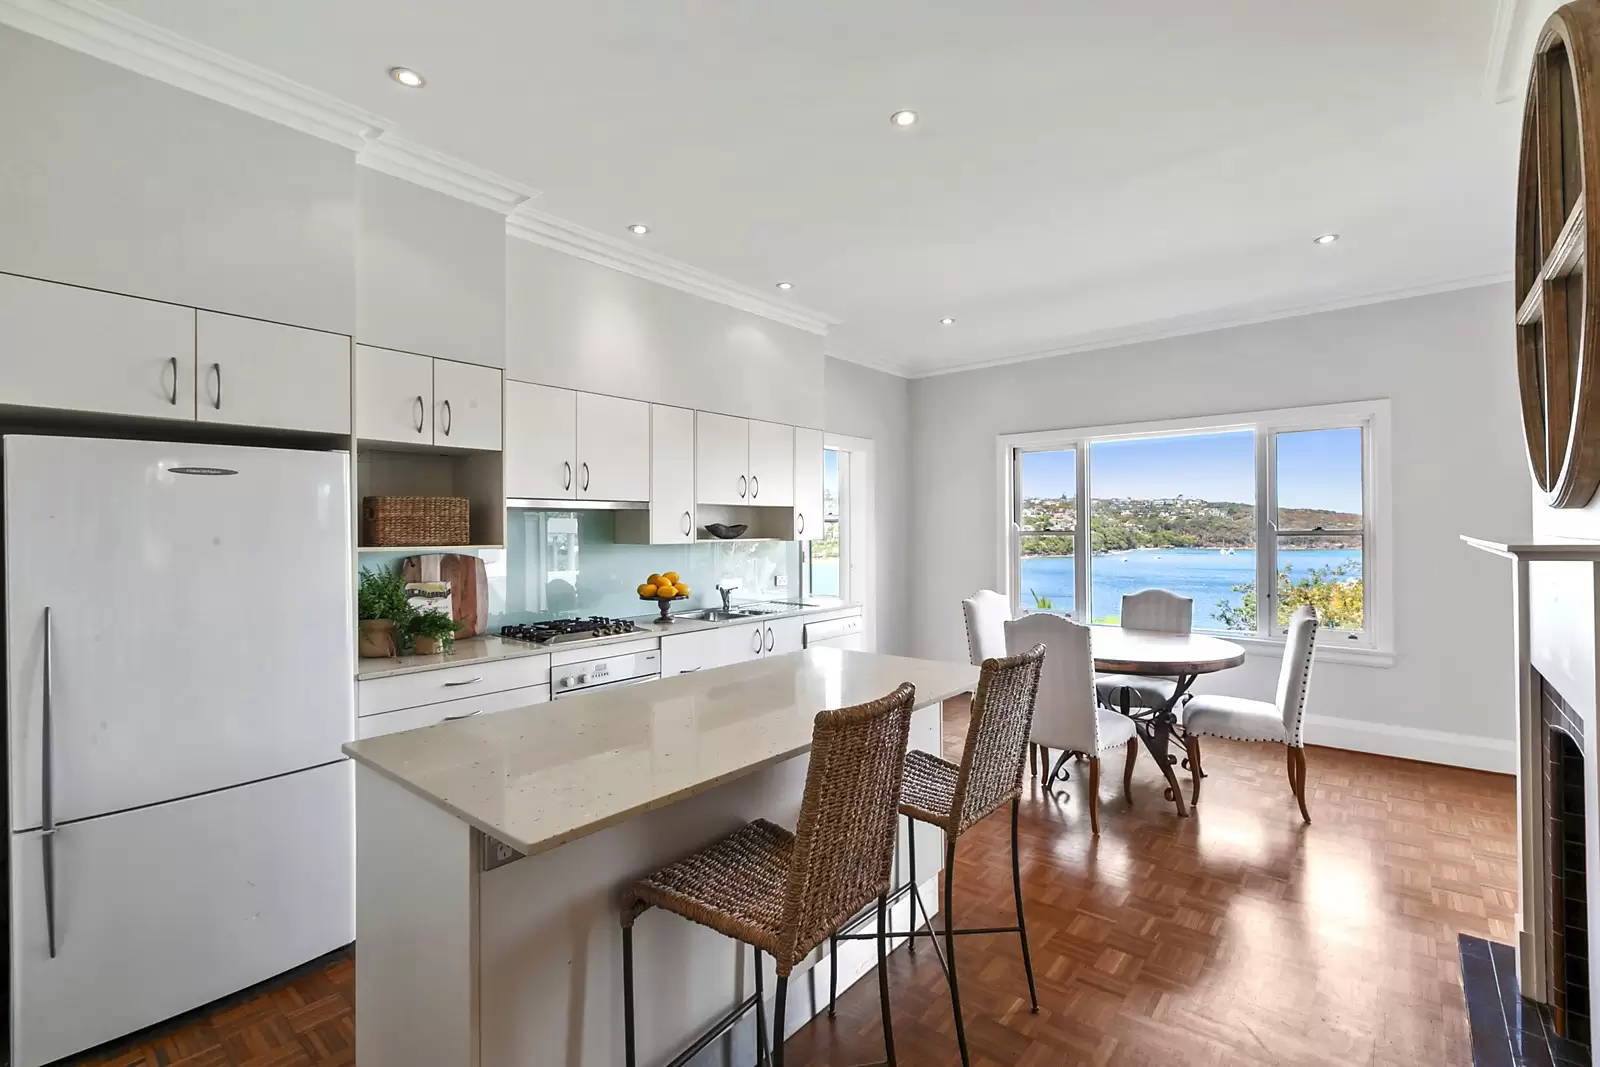 Photo #15: 51 Parriwi Road, Mosman - Sold by Sydney Sotheby's International Realty